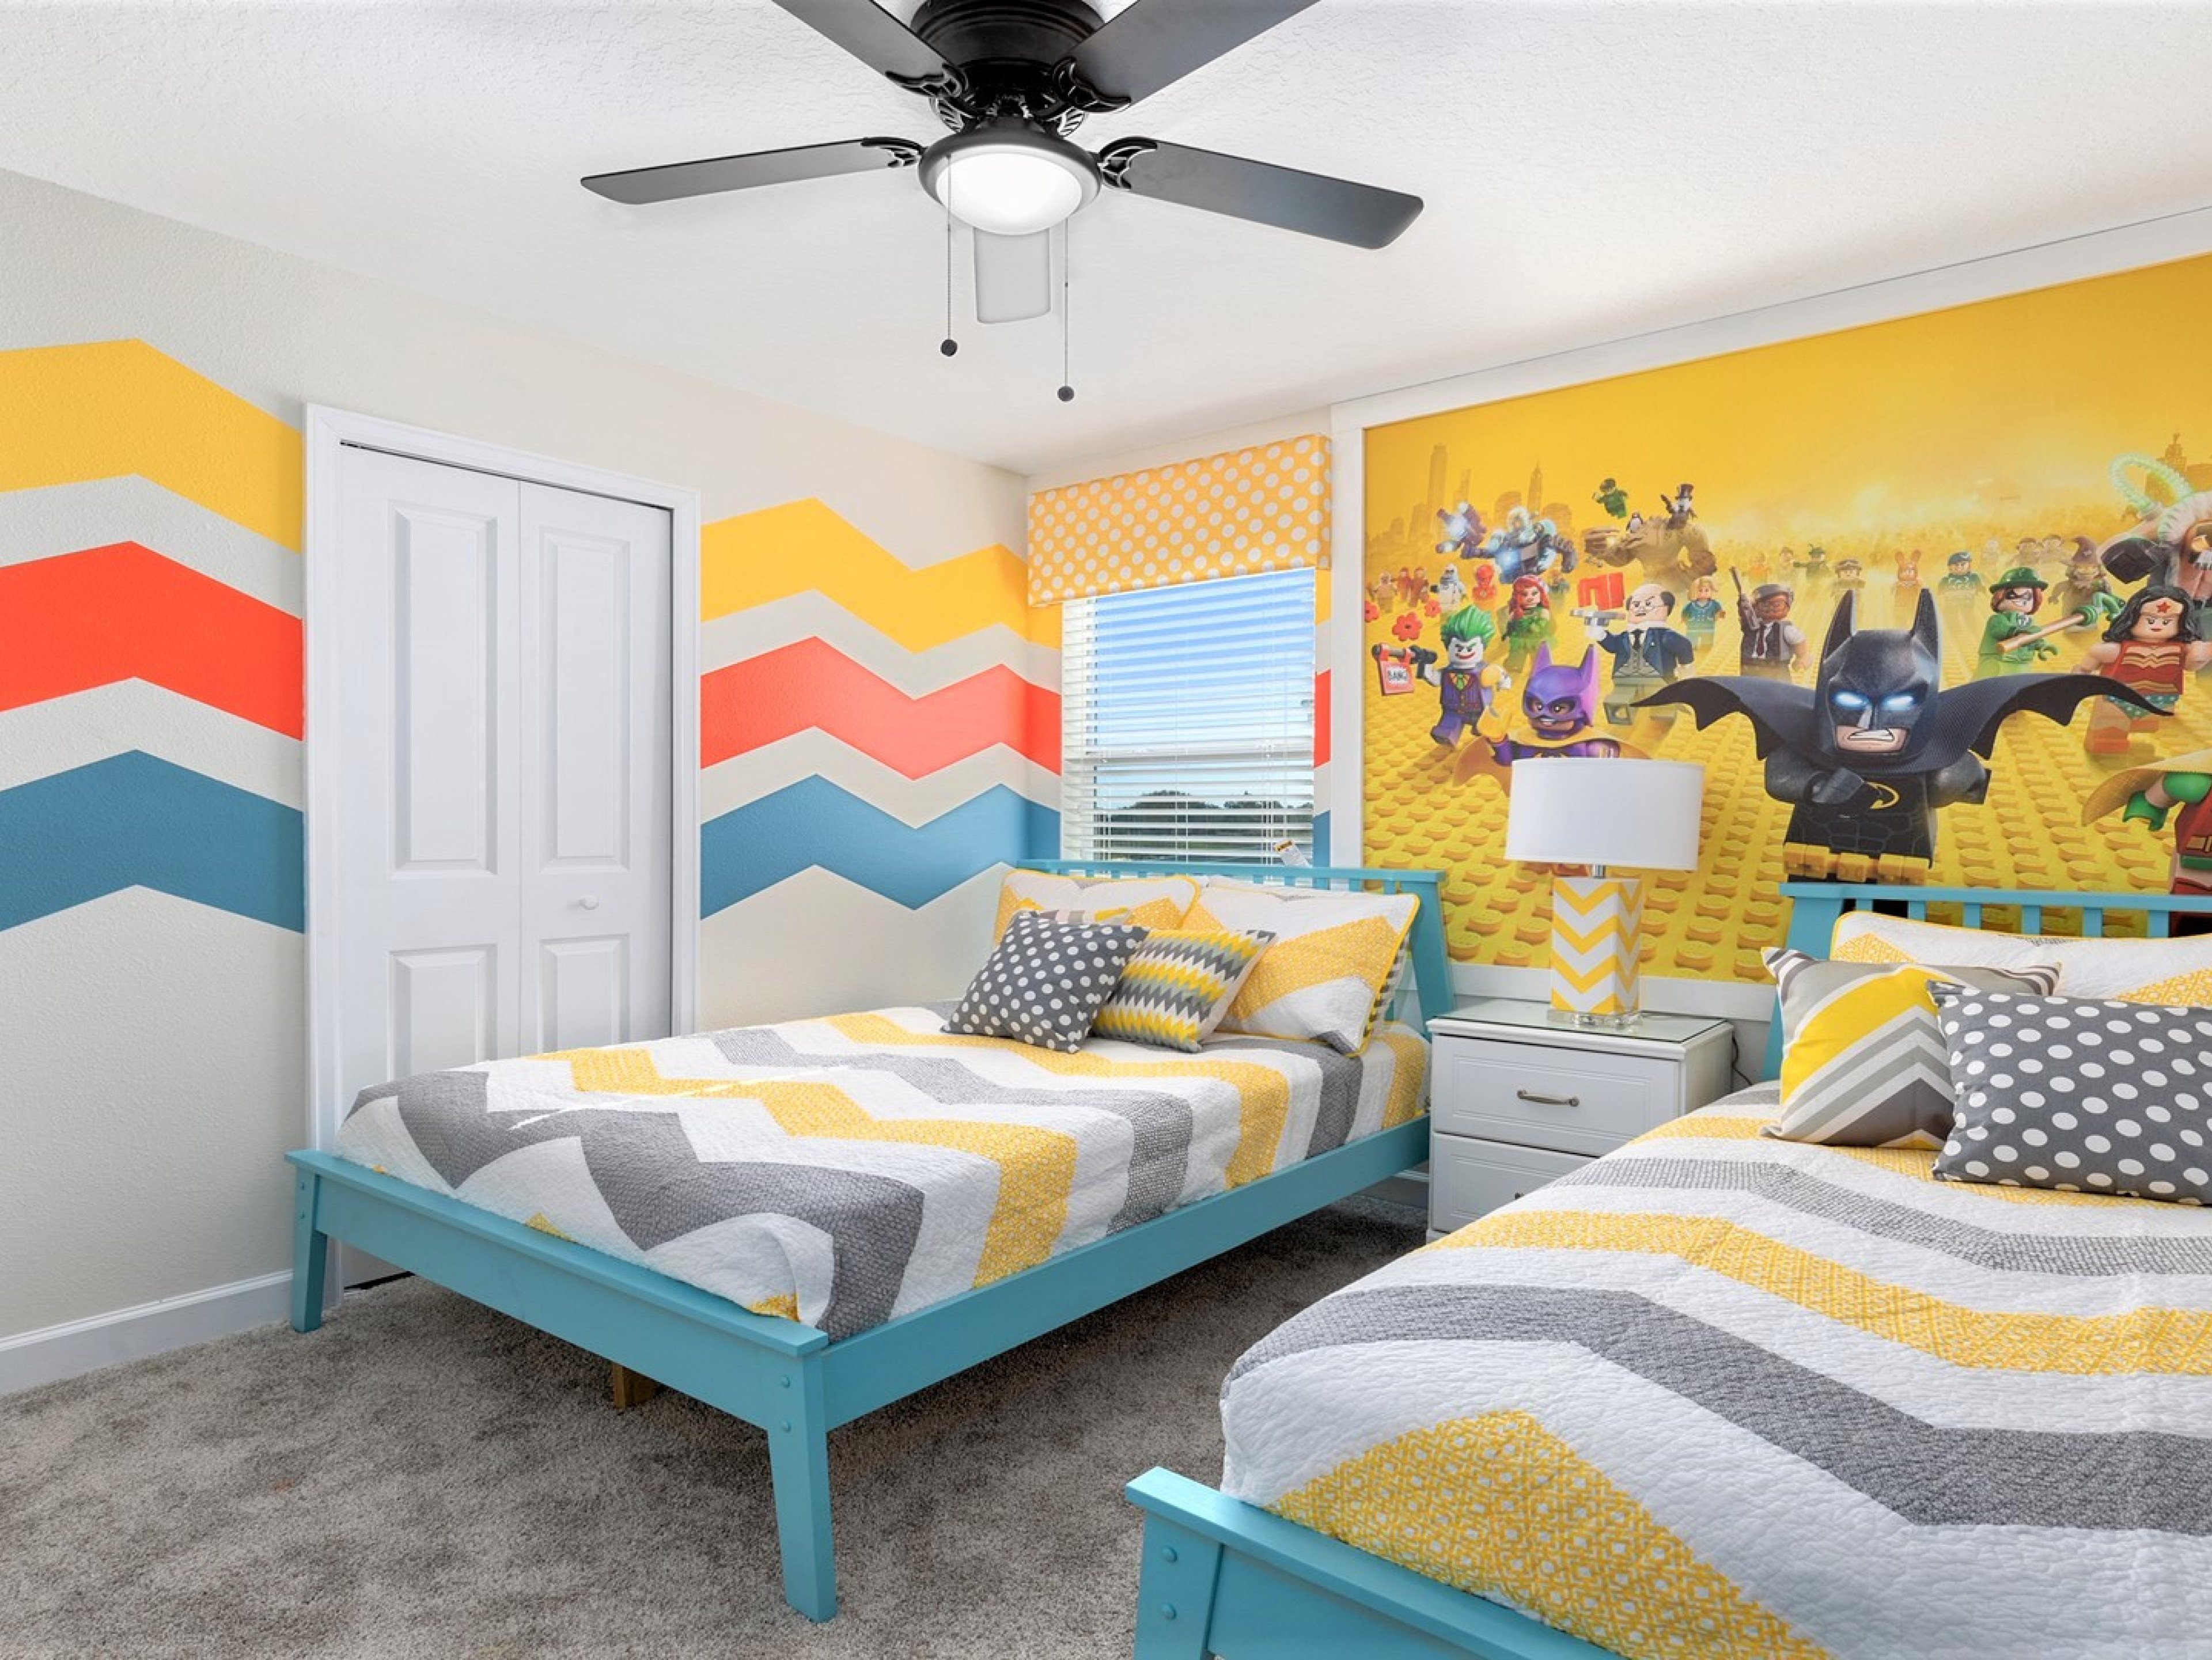 Orlando homes with Legoland-themed rooms - Championsgate 1765